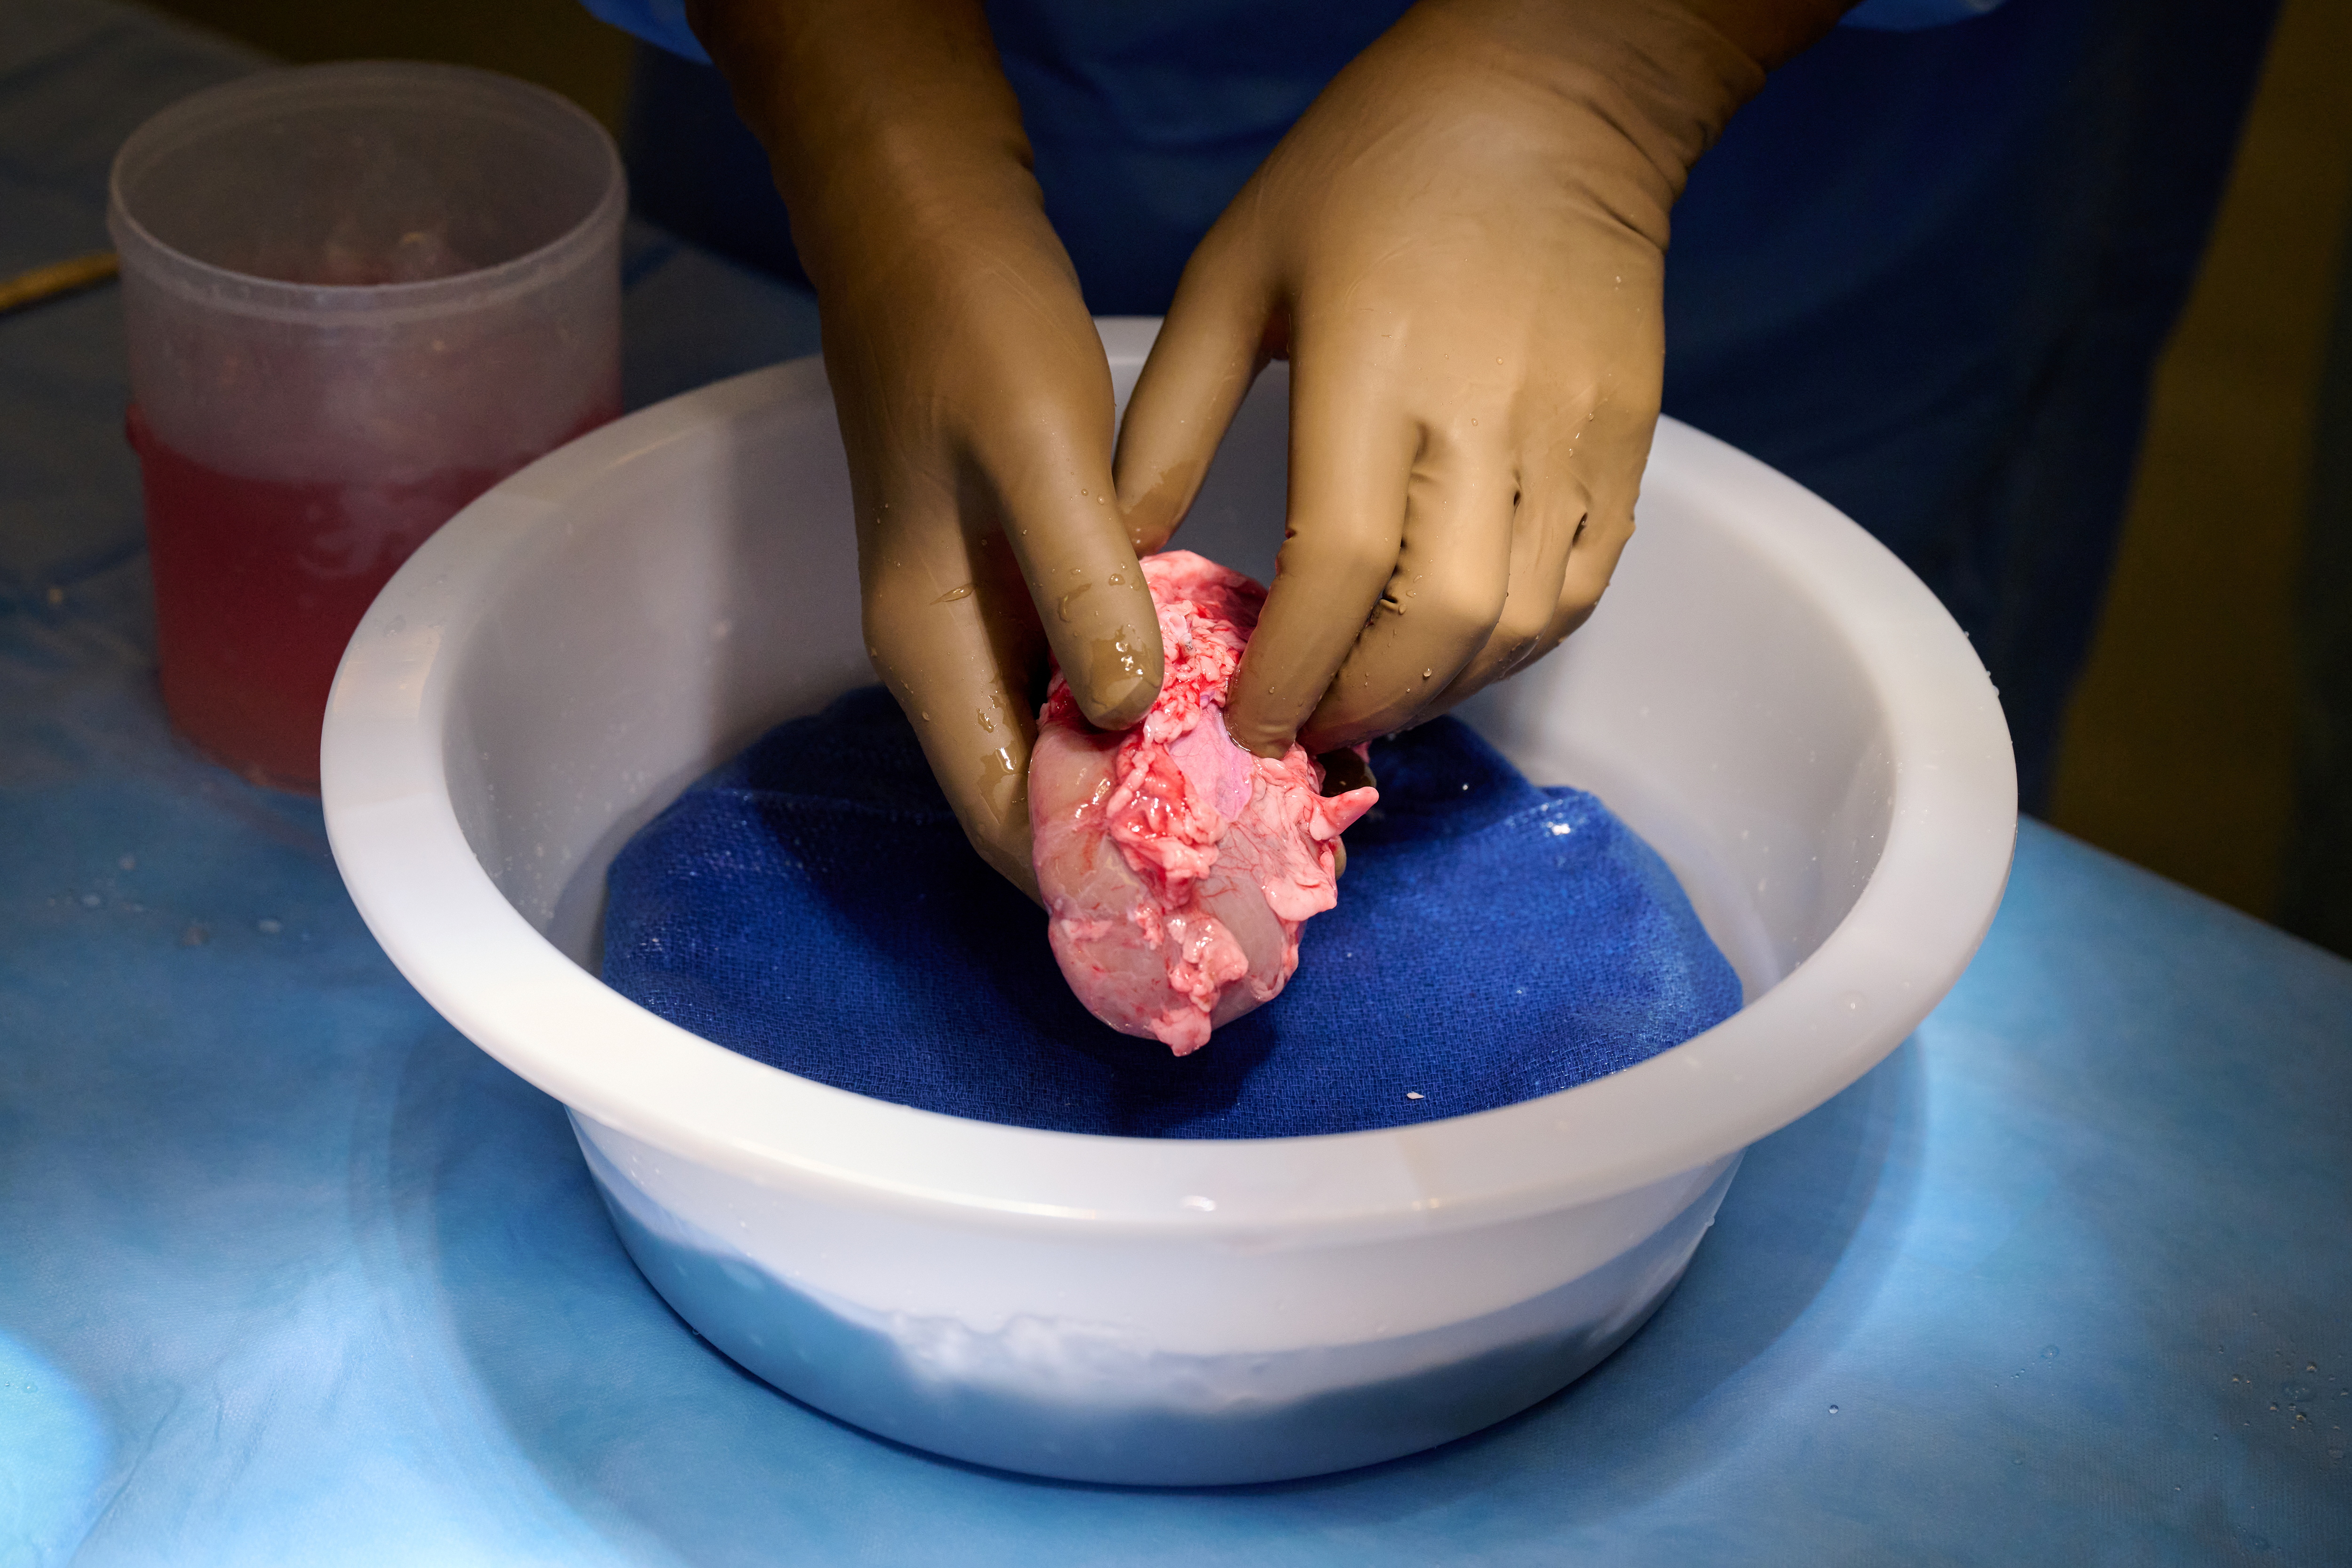 A genetically engineered pig kidney is cleaned and prepared for transplantation to a human at NYU Langone in New York, U.S., in this undated handout photo. Joe Carrotta for NYU Langone Health/Handout via REUTERS